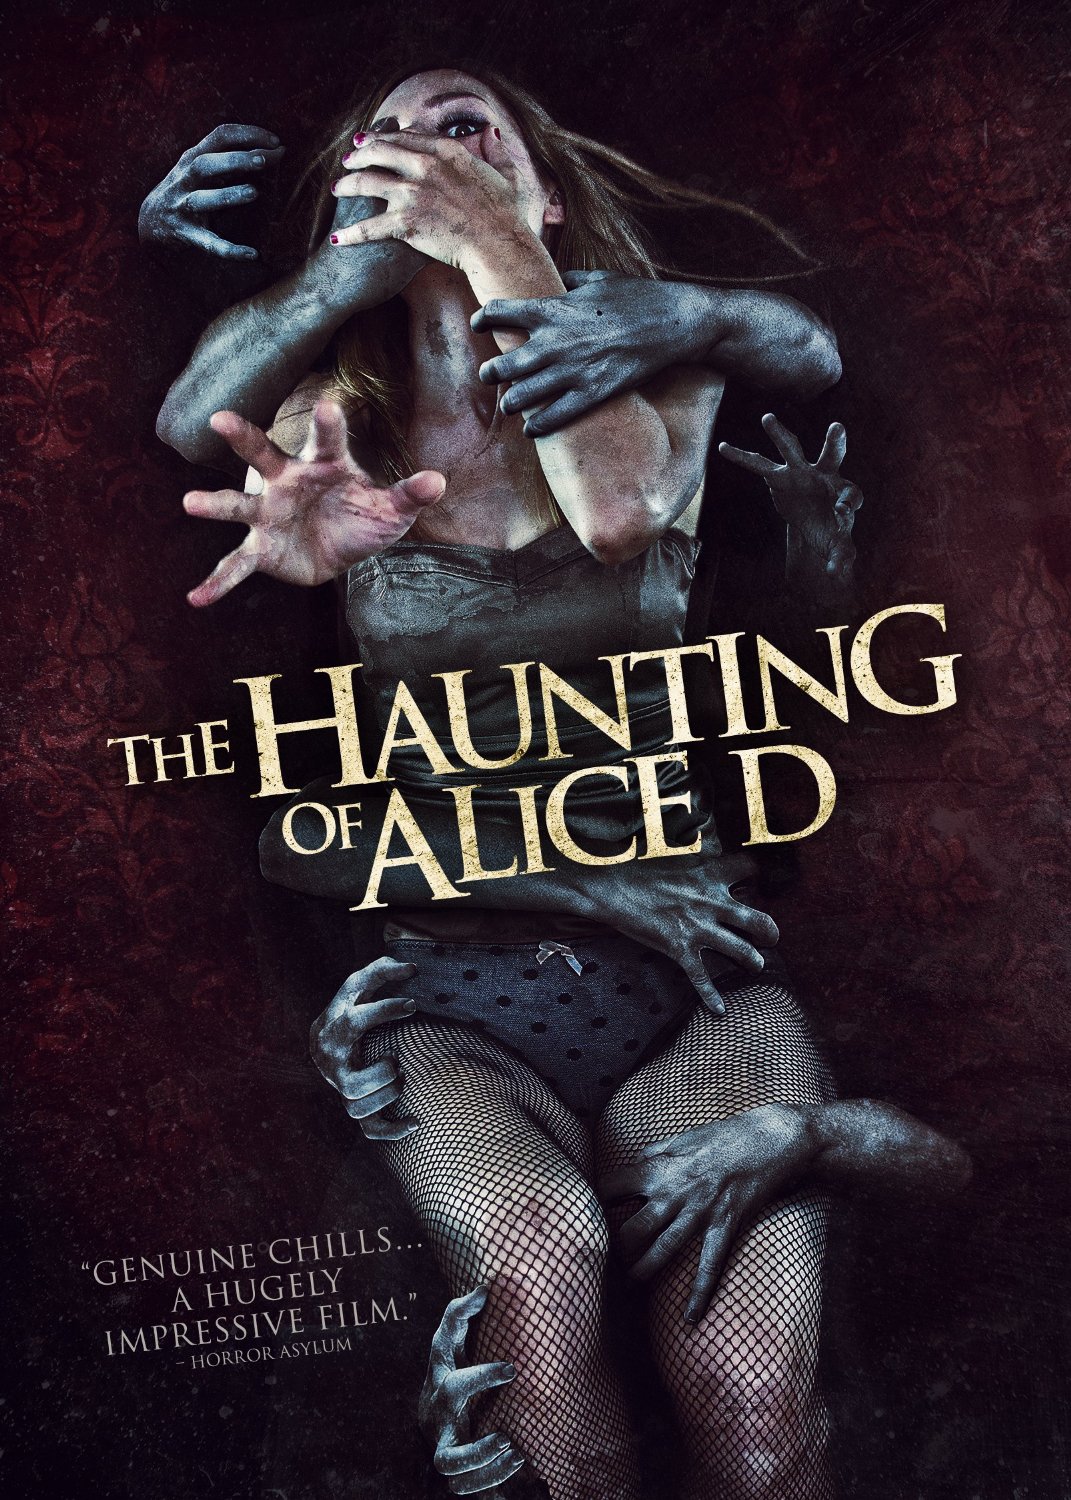 The Haunting of Alice D 2016